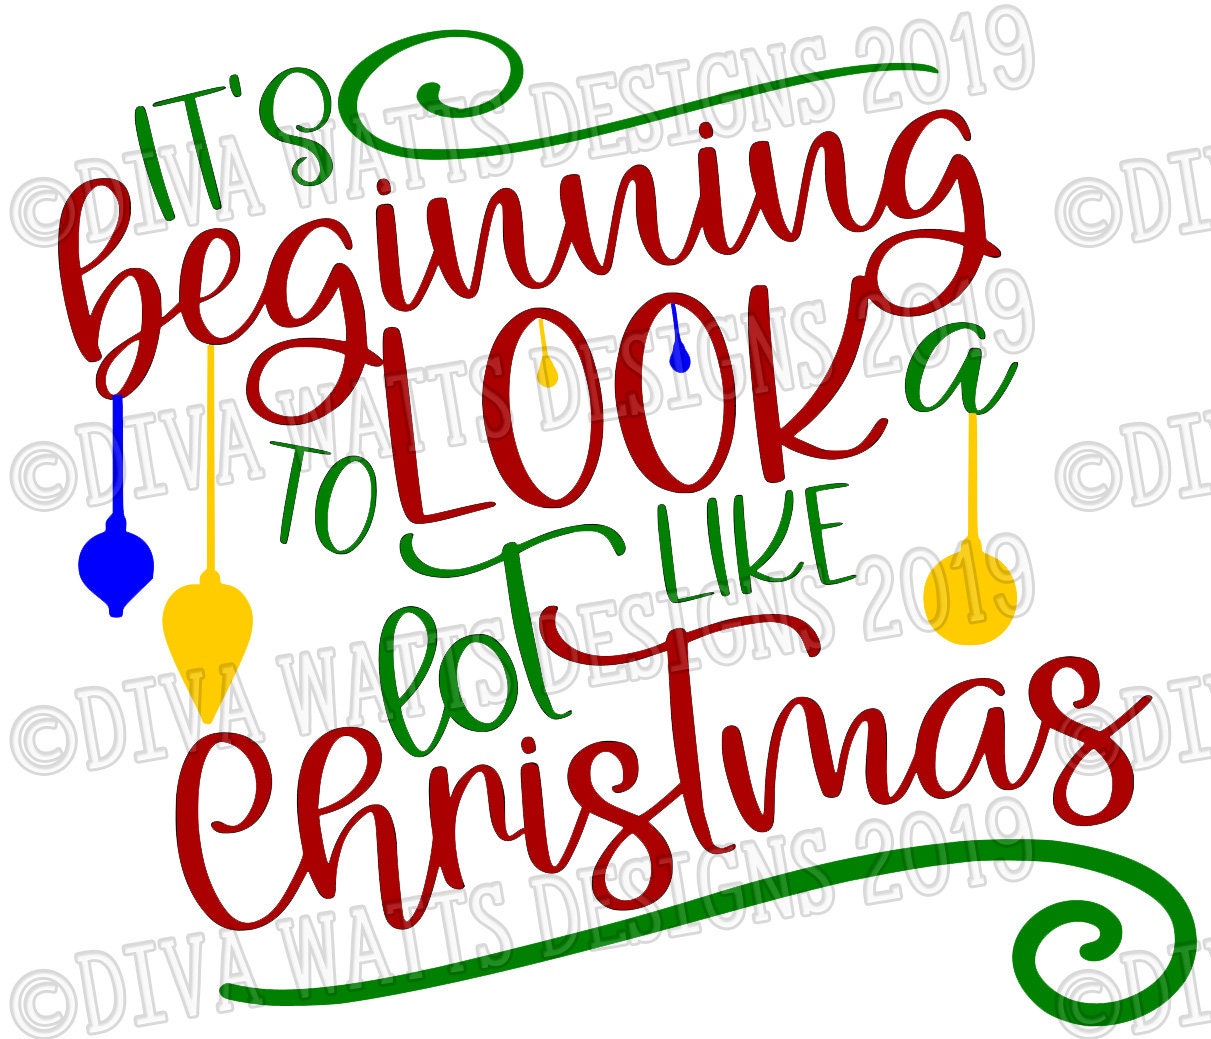 SVG It's Beginning to Look a Lot Like Christmas | Cutting File | Instant Download | DXF PNG eps jpg | Vinyl Stencil htv | Holiday Sign Shirt